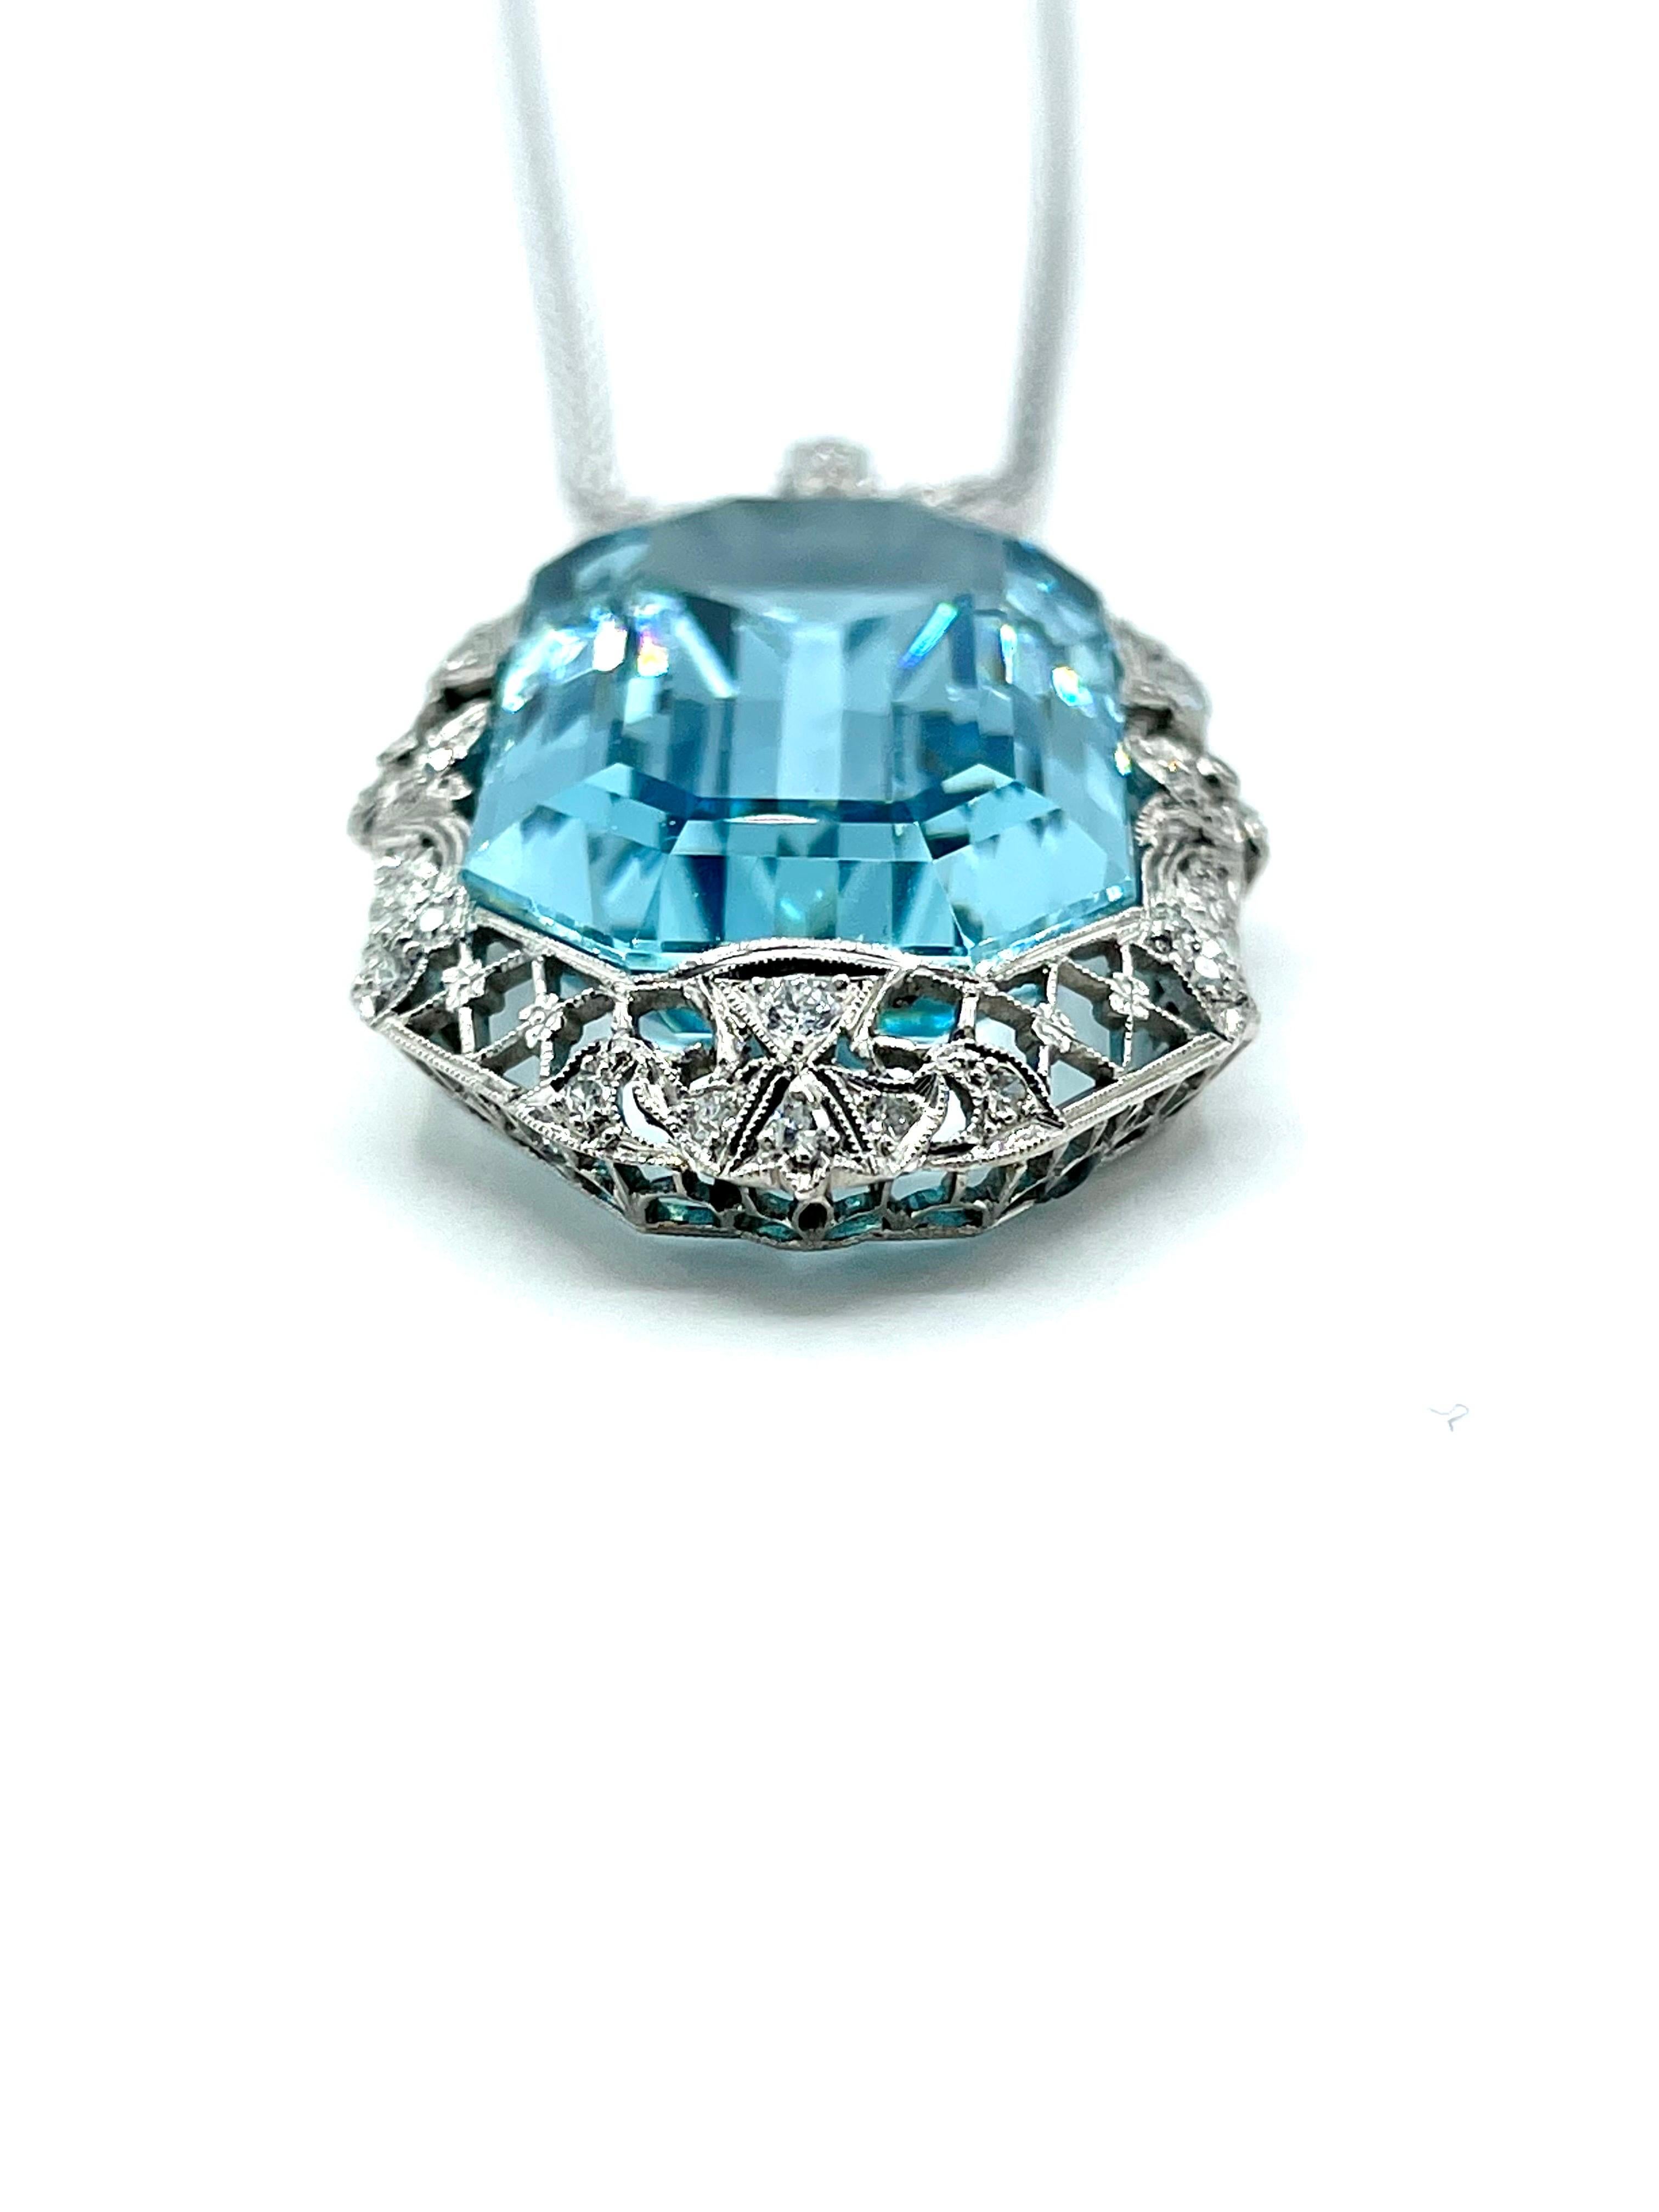 An absolutely stunning Art Deco Aquamarine pendant!  The 51.88 carat emerald cut Aquamarine has amazing brilliance and color.  It is set in a prong set filigree Art Deco mounting containing old European cut and single cut diamonds weighing 1.00